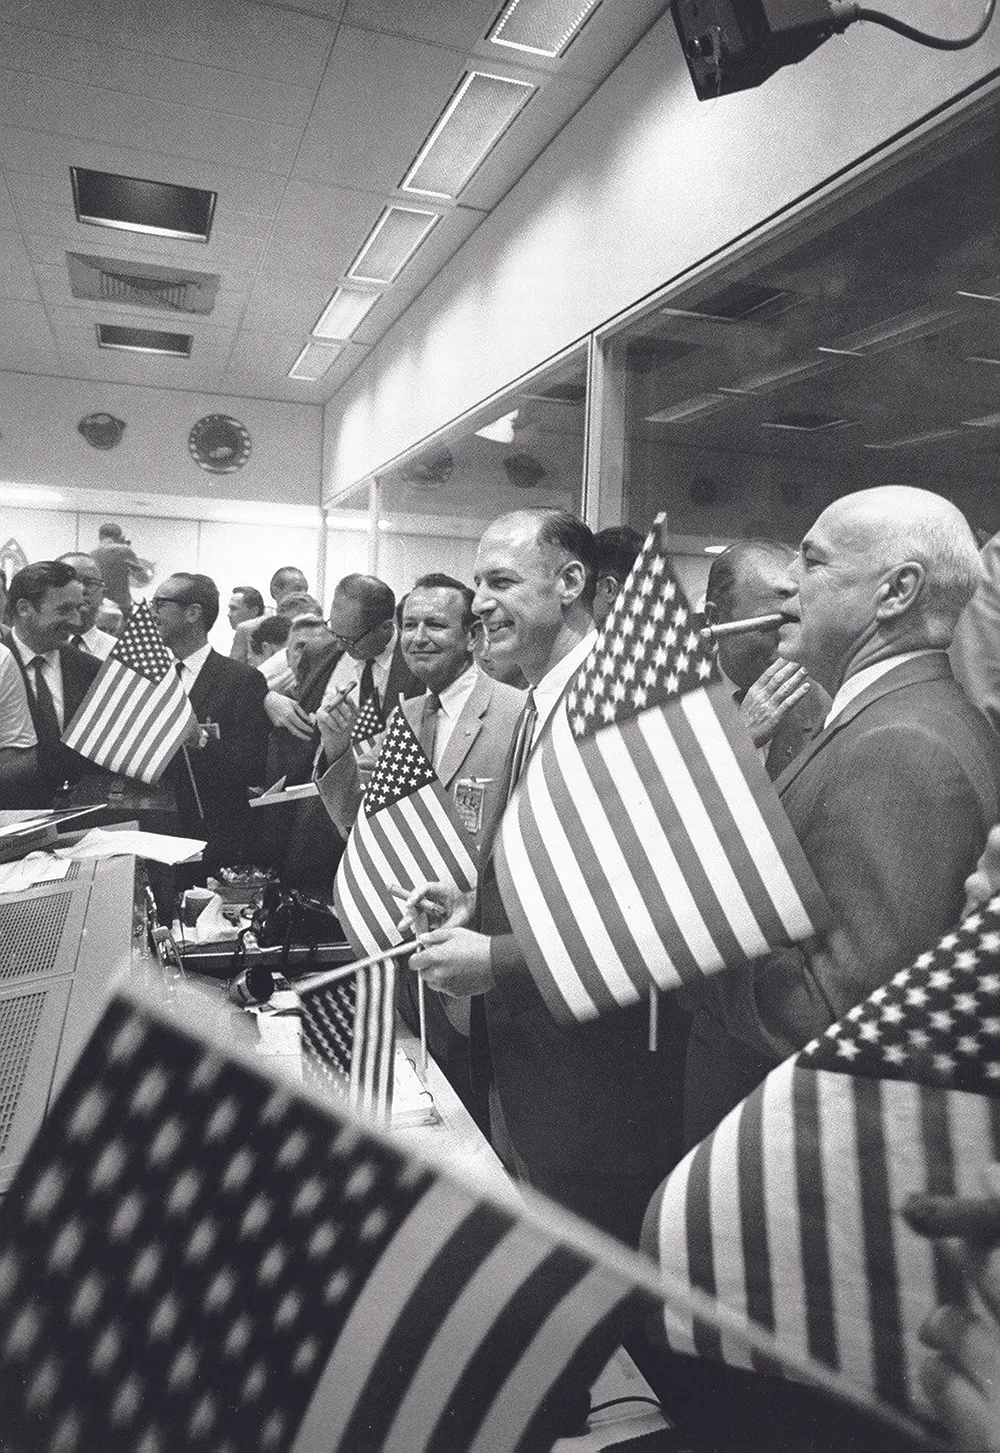 24 July 1969. On hearing the news of a safe splashdown celebratory cigars are lit at mission control in Houston. Credit: NASA